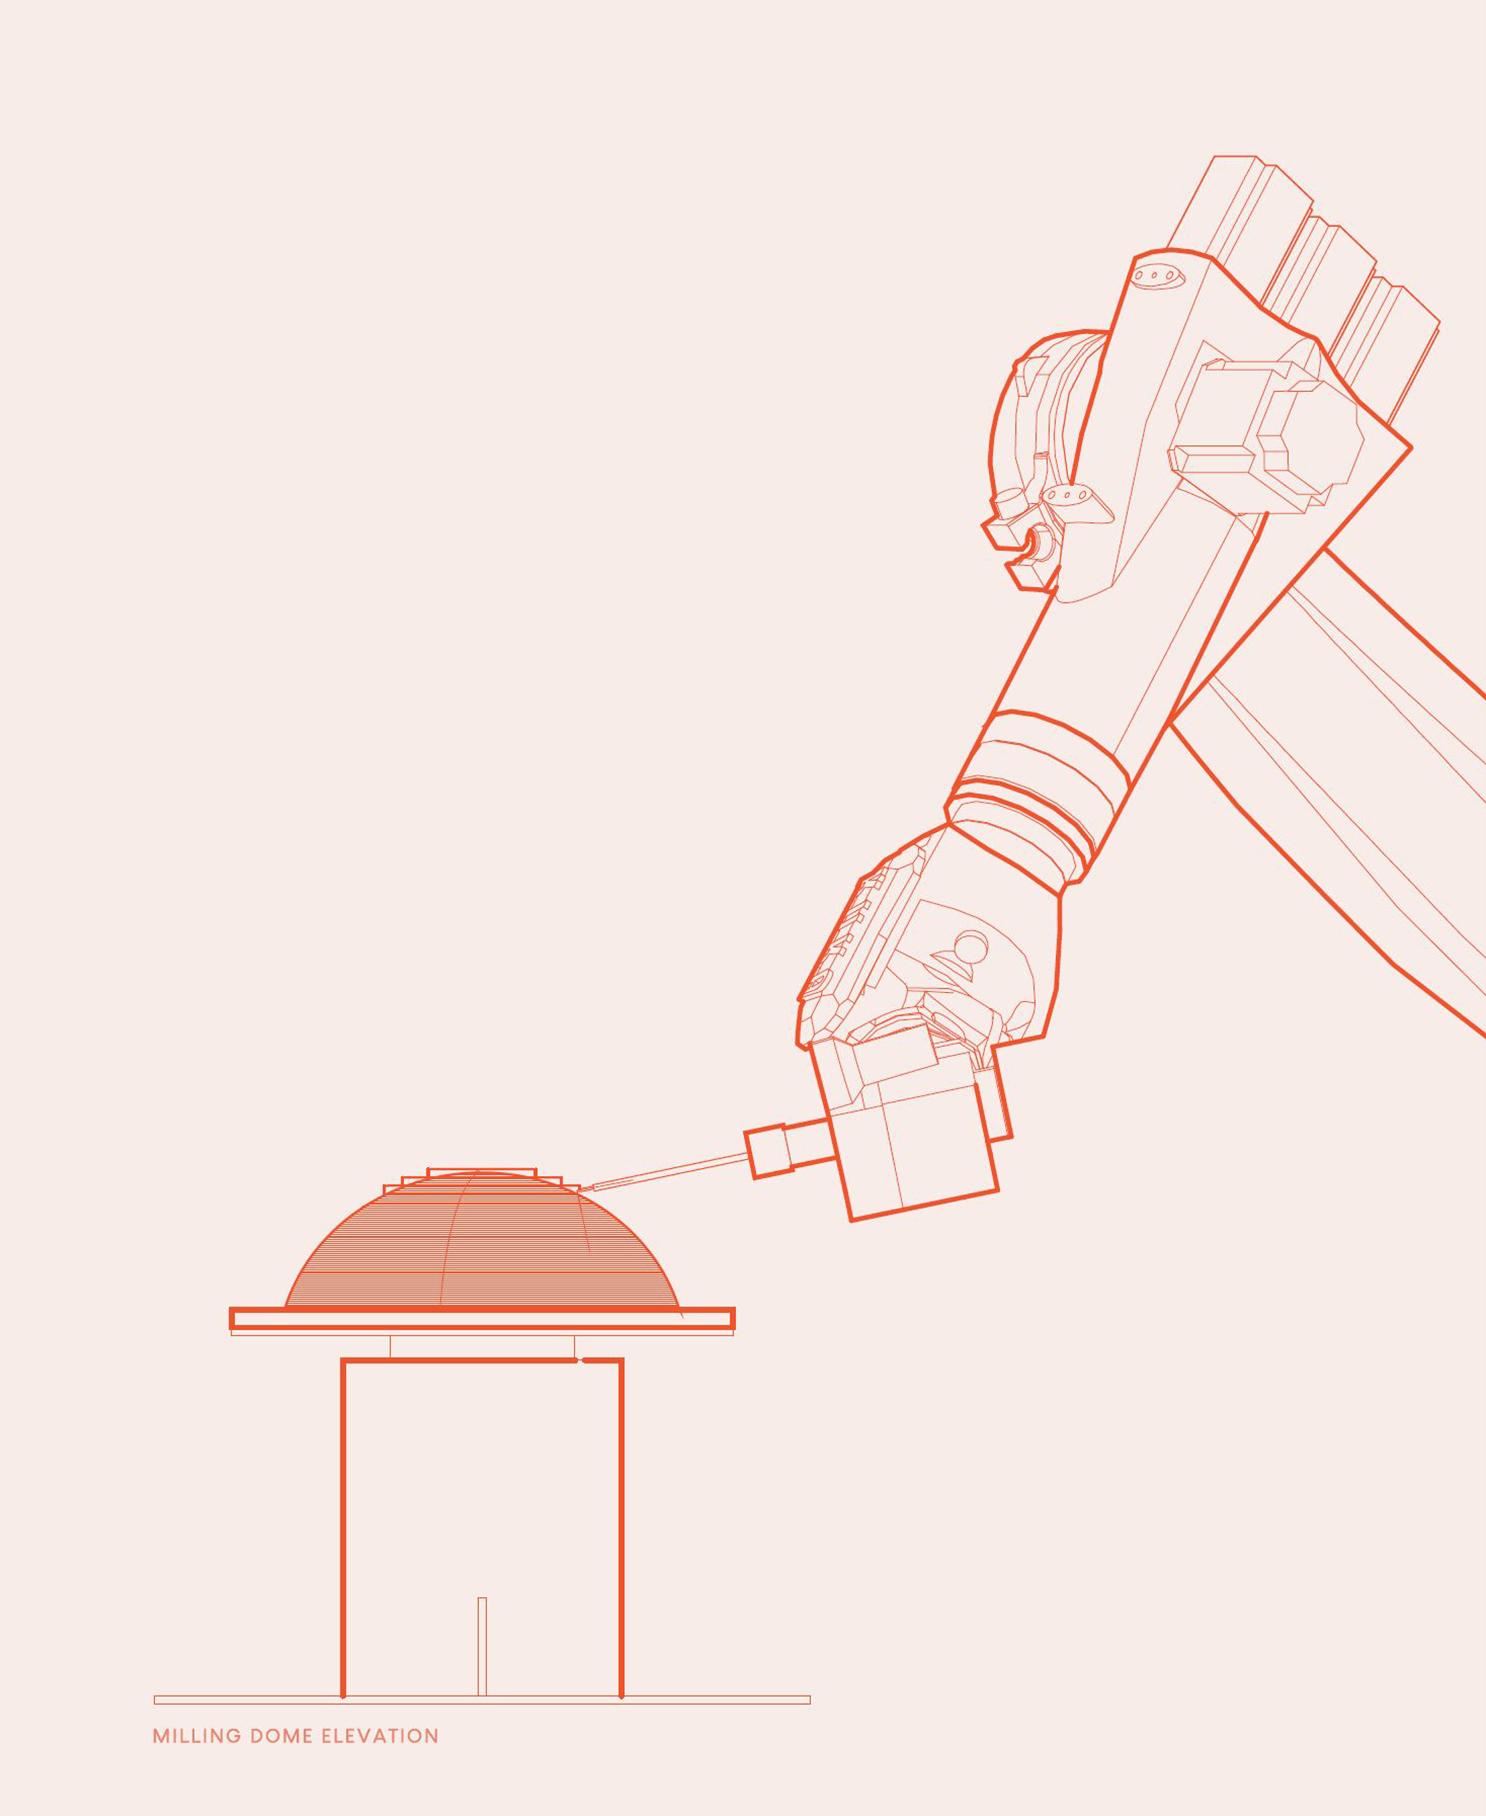 An illustration of a large robotic arm 3D printing a dome shape.